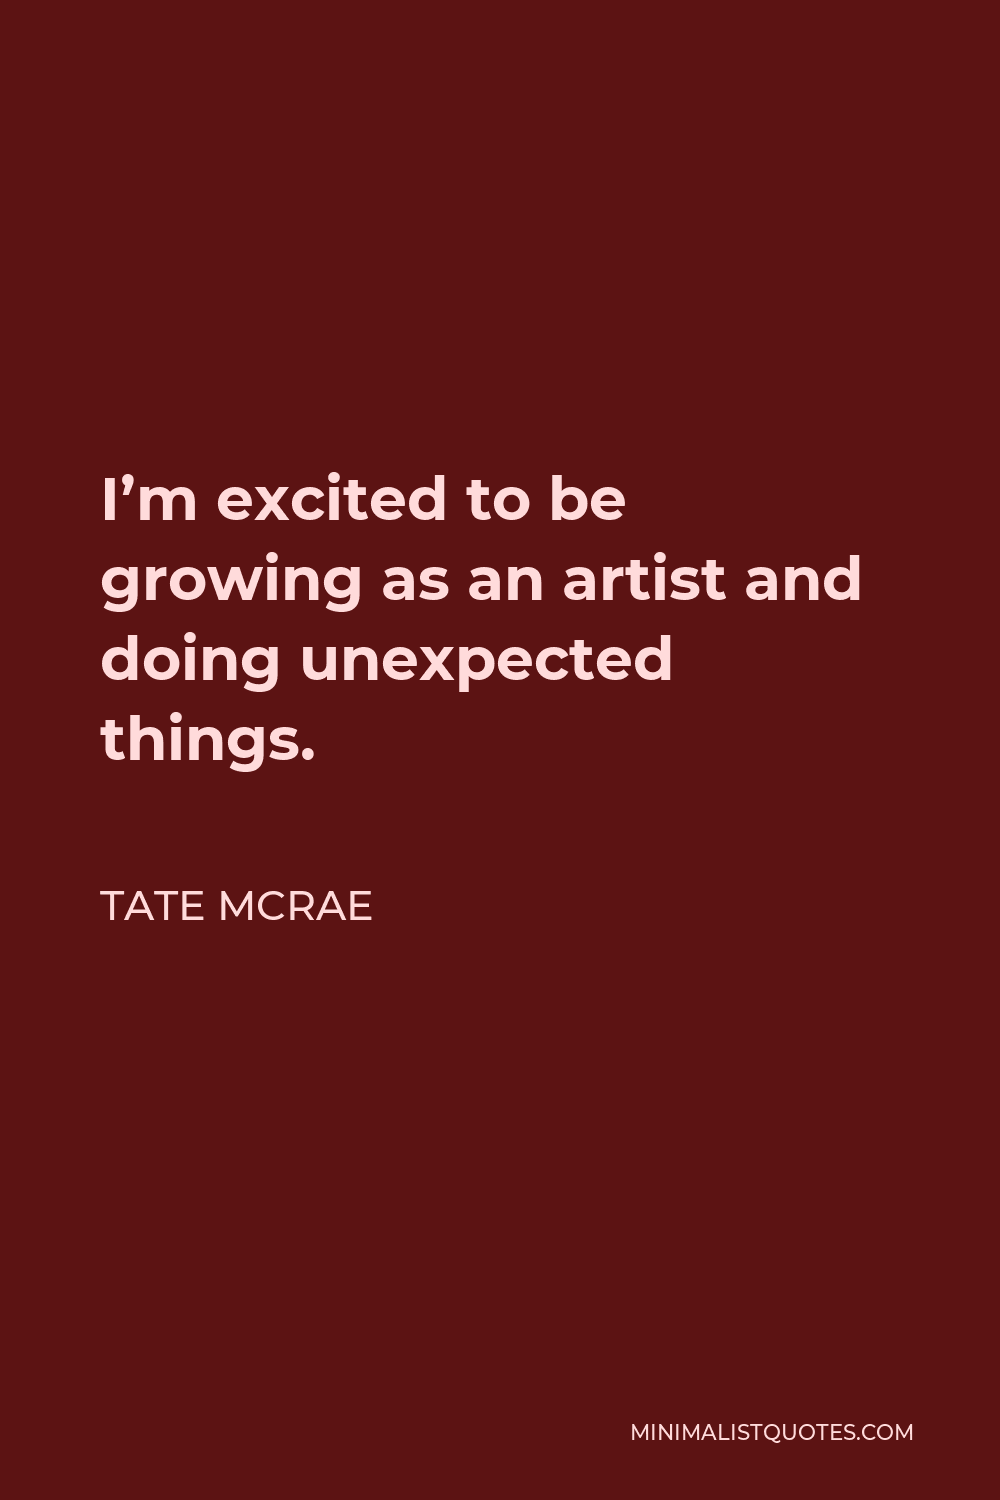 Tate McRae Quote - I’m excited to be growing as an artist and doing unexpected things.